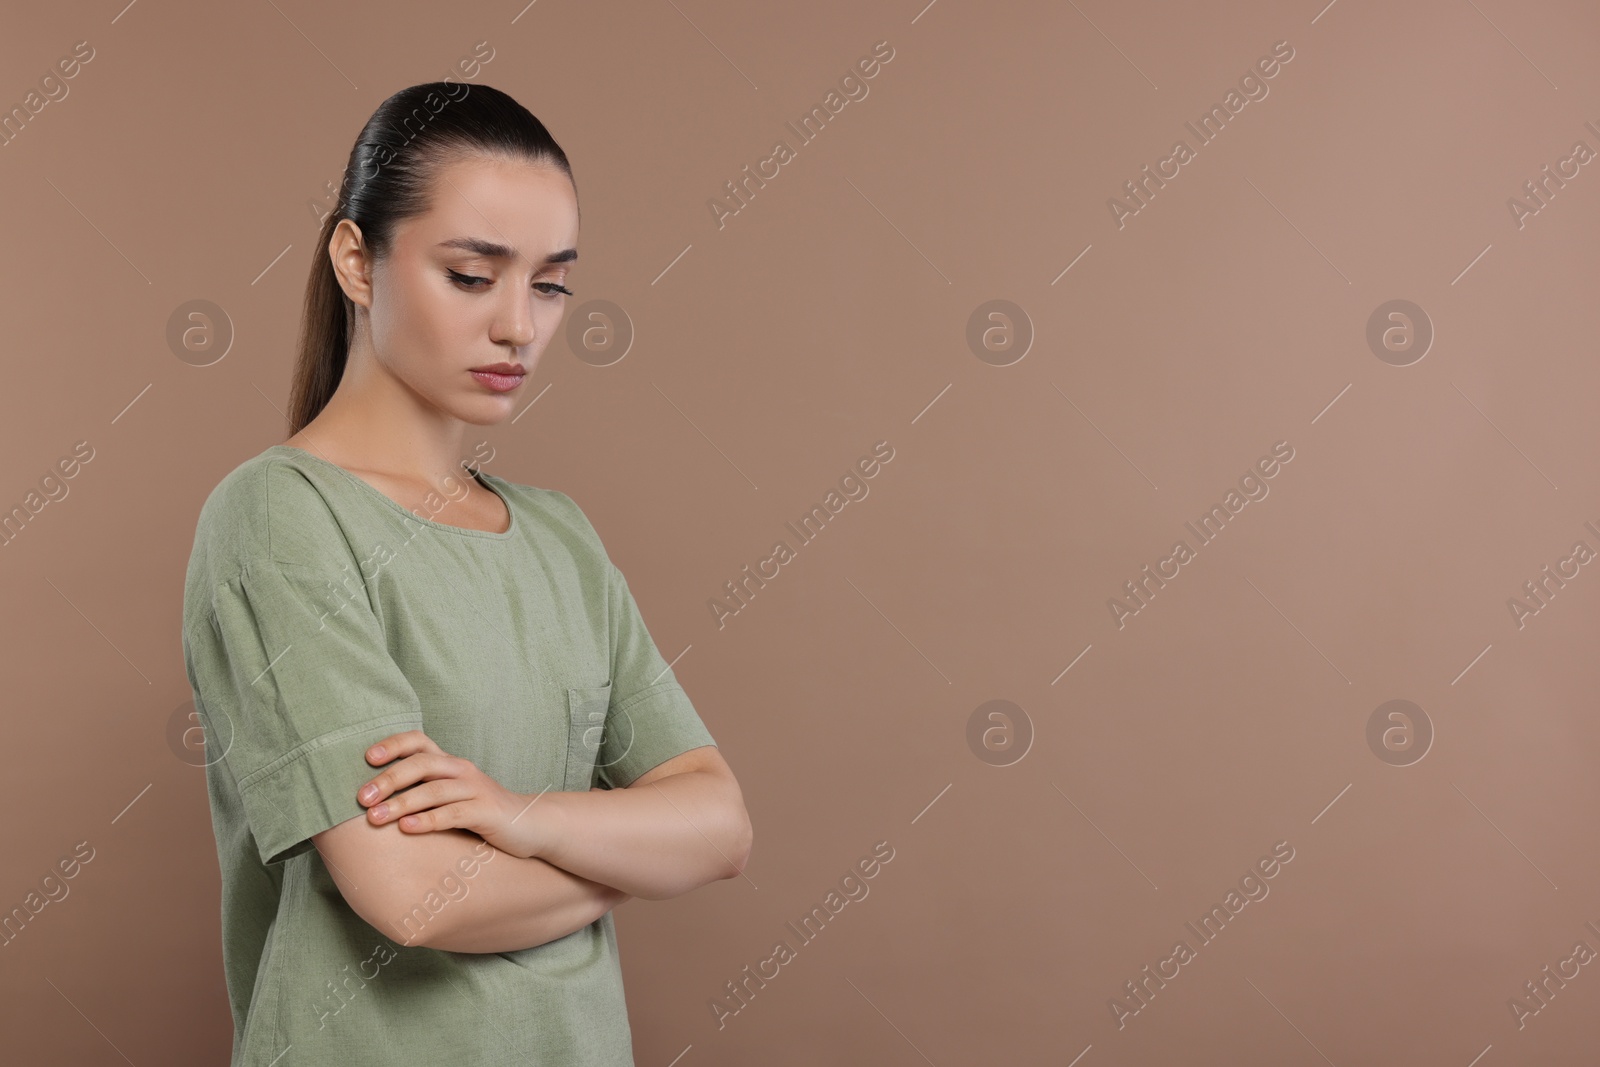 Photo of Portrait of resentful woman with crossed arms on brown background. Space for text